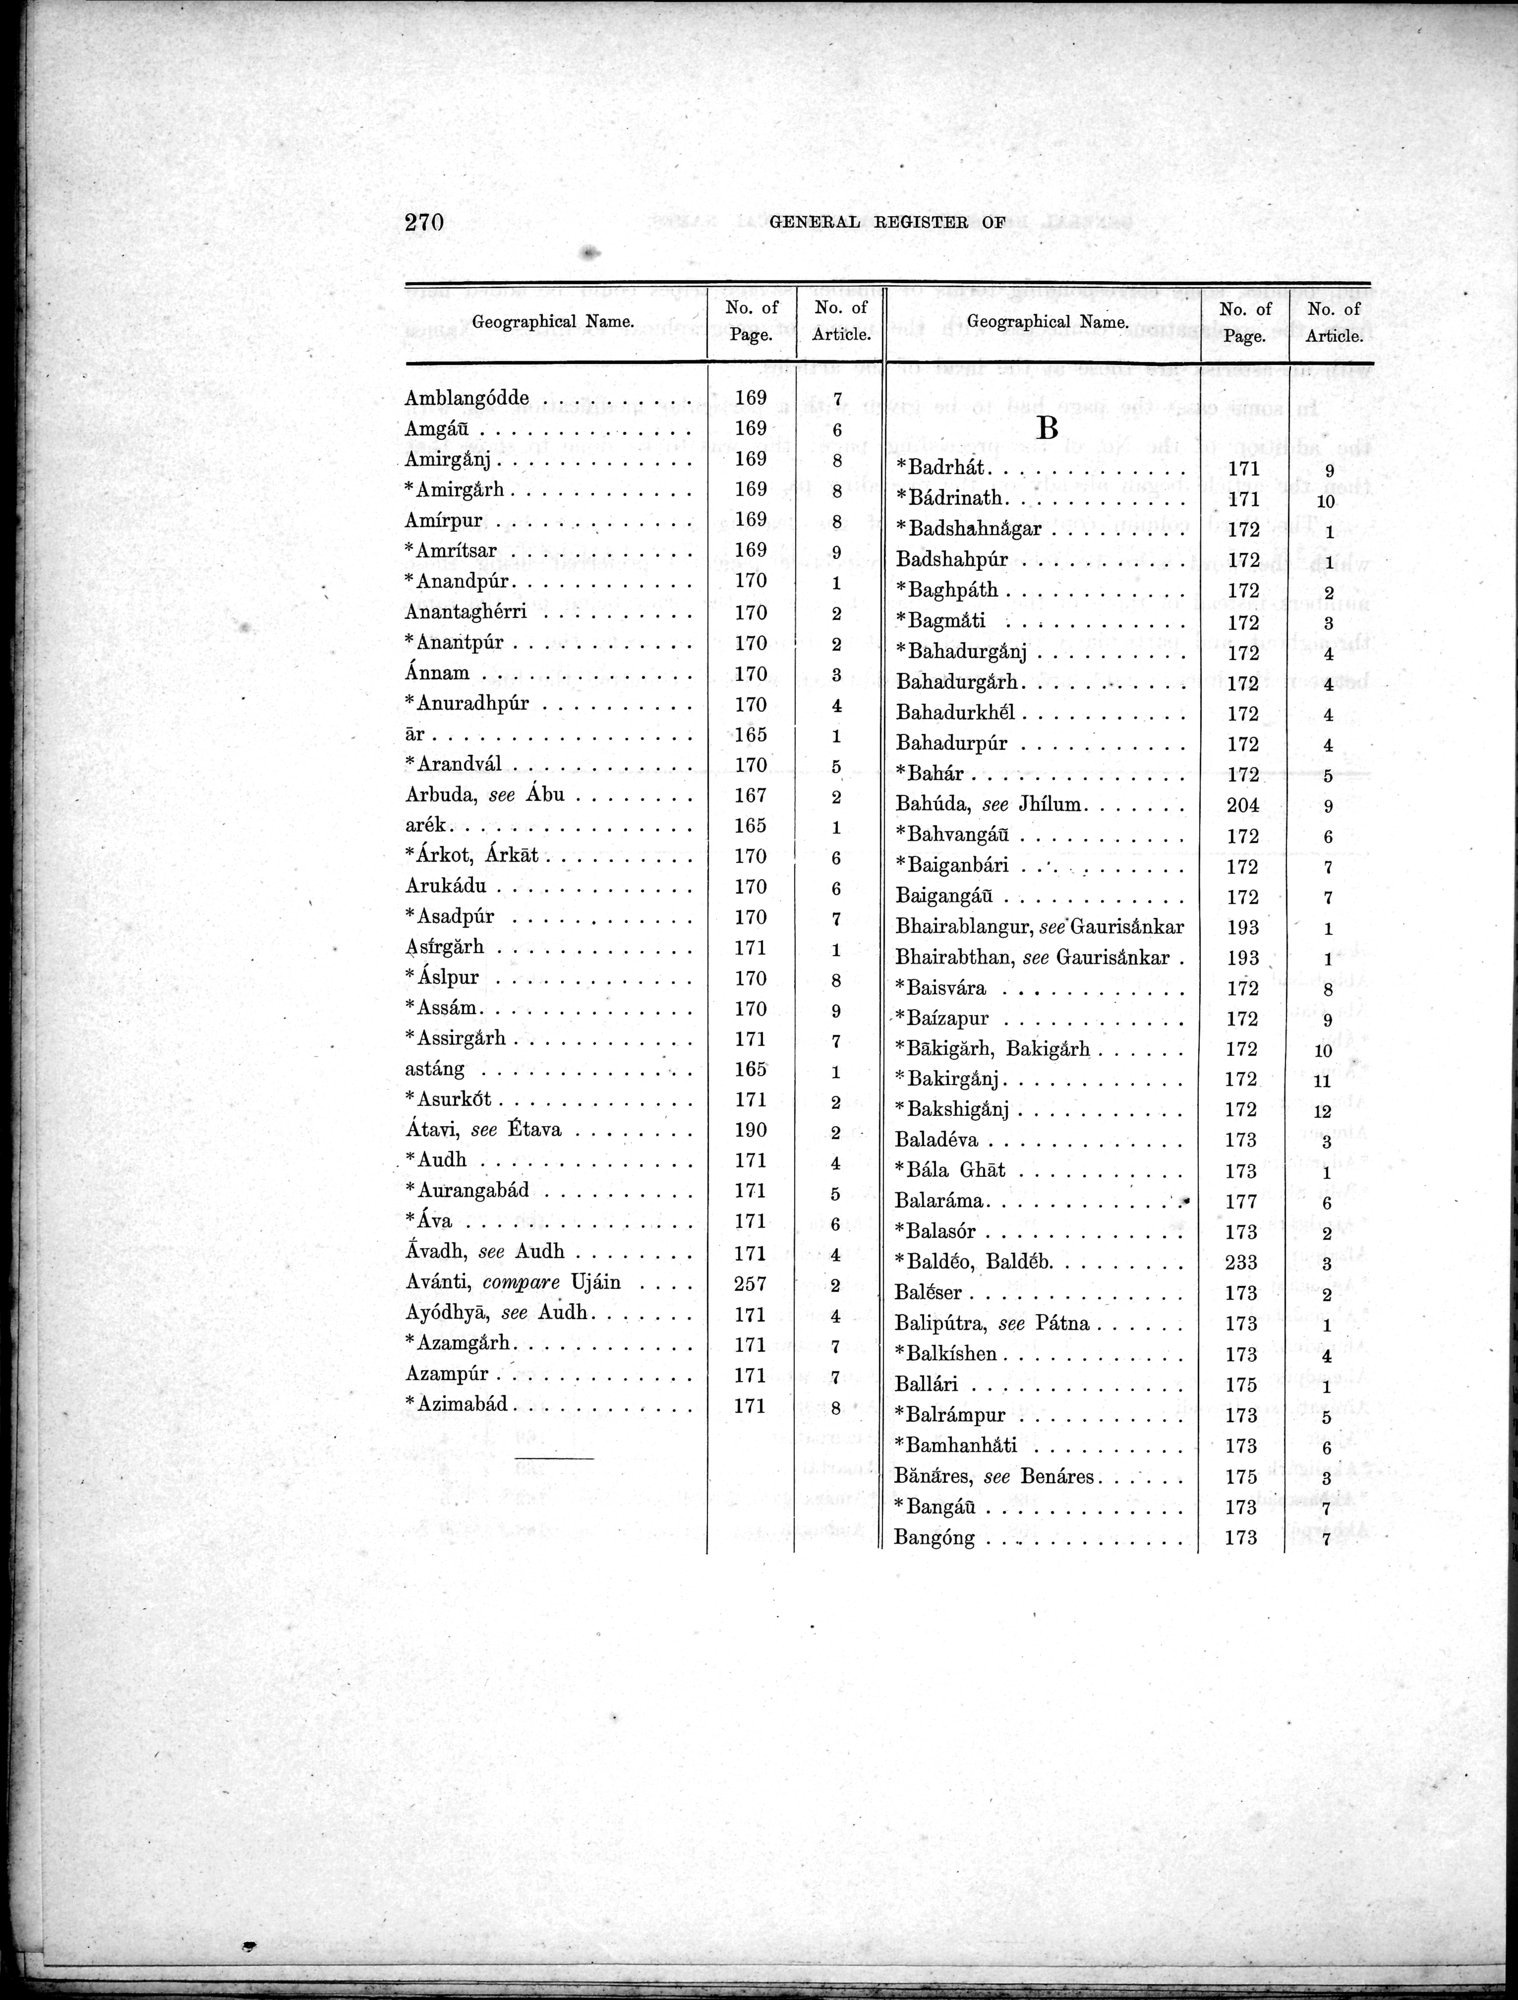 Results of a Scientific Mission to India and High Asia : vol.3 / Page 302 (Grayscale High Resolution Image)